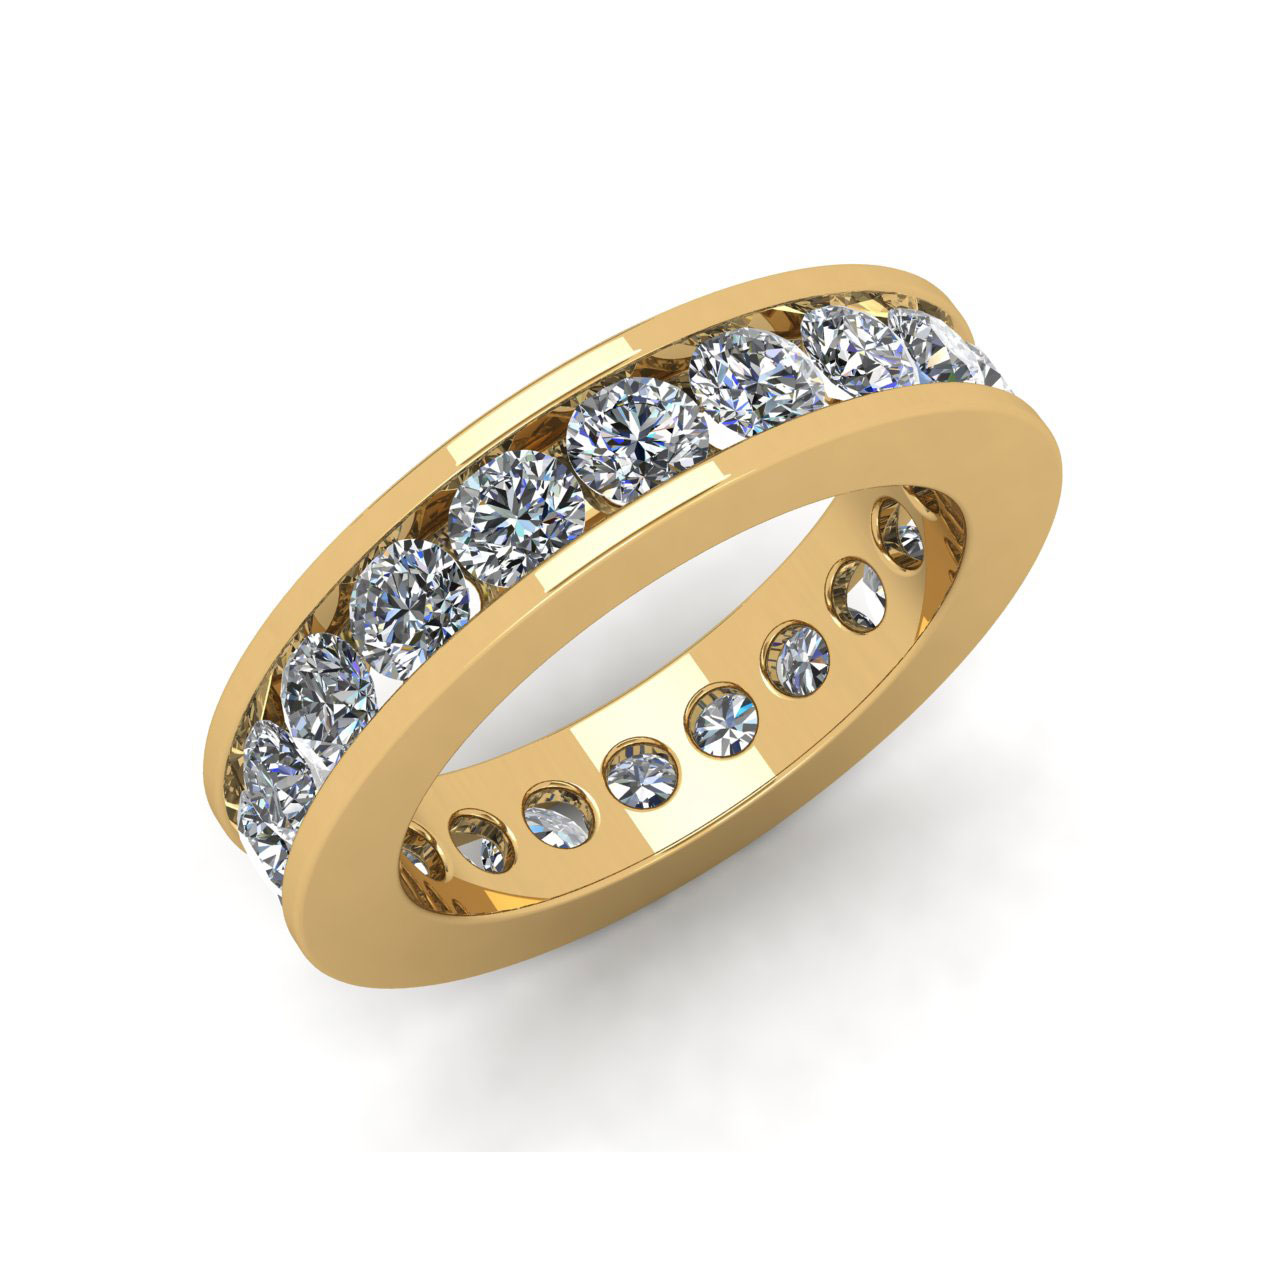 Jewel We Sell Natural 3.00Ct Round Diamond Channel Set Ladies Anniversary Wedding Eternity Band Ring Solid 14k Yellow Gold G SI1